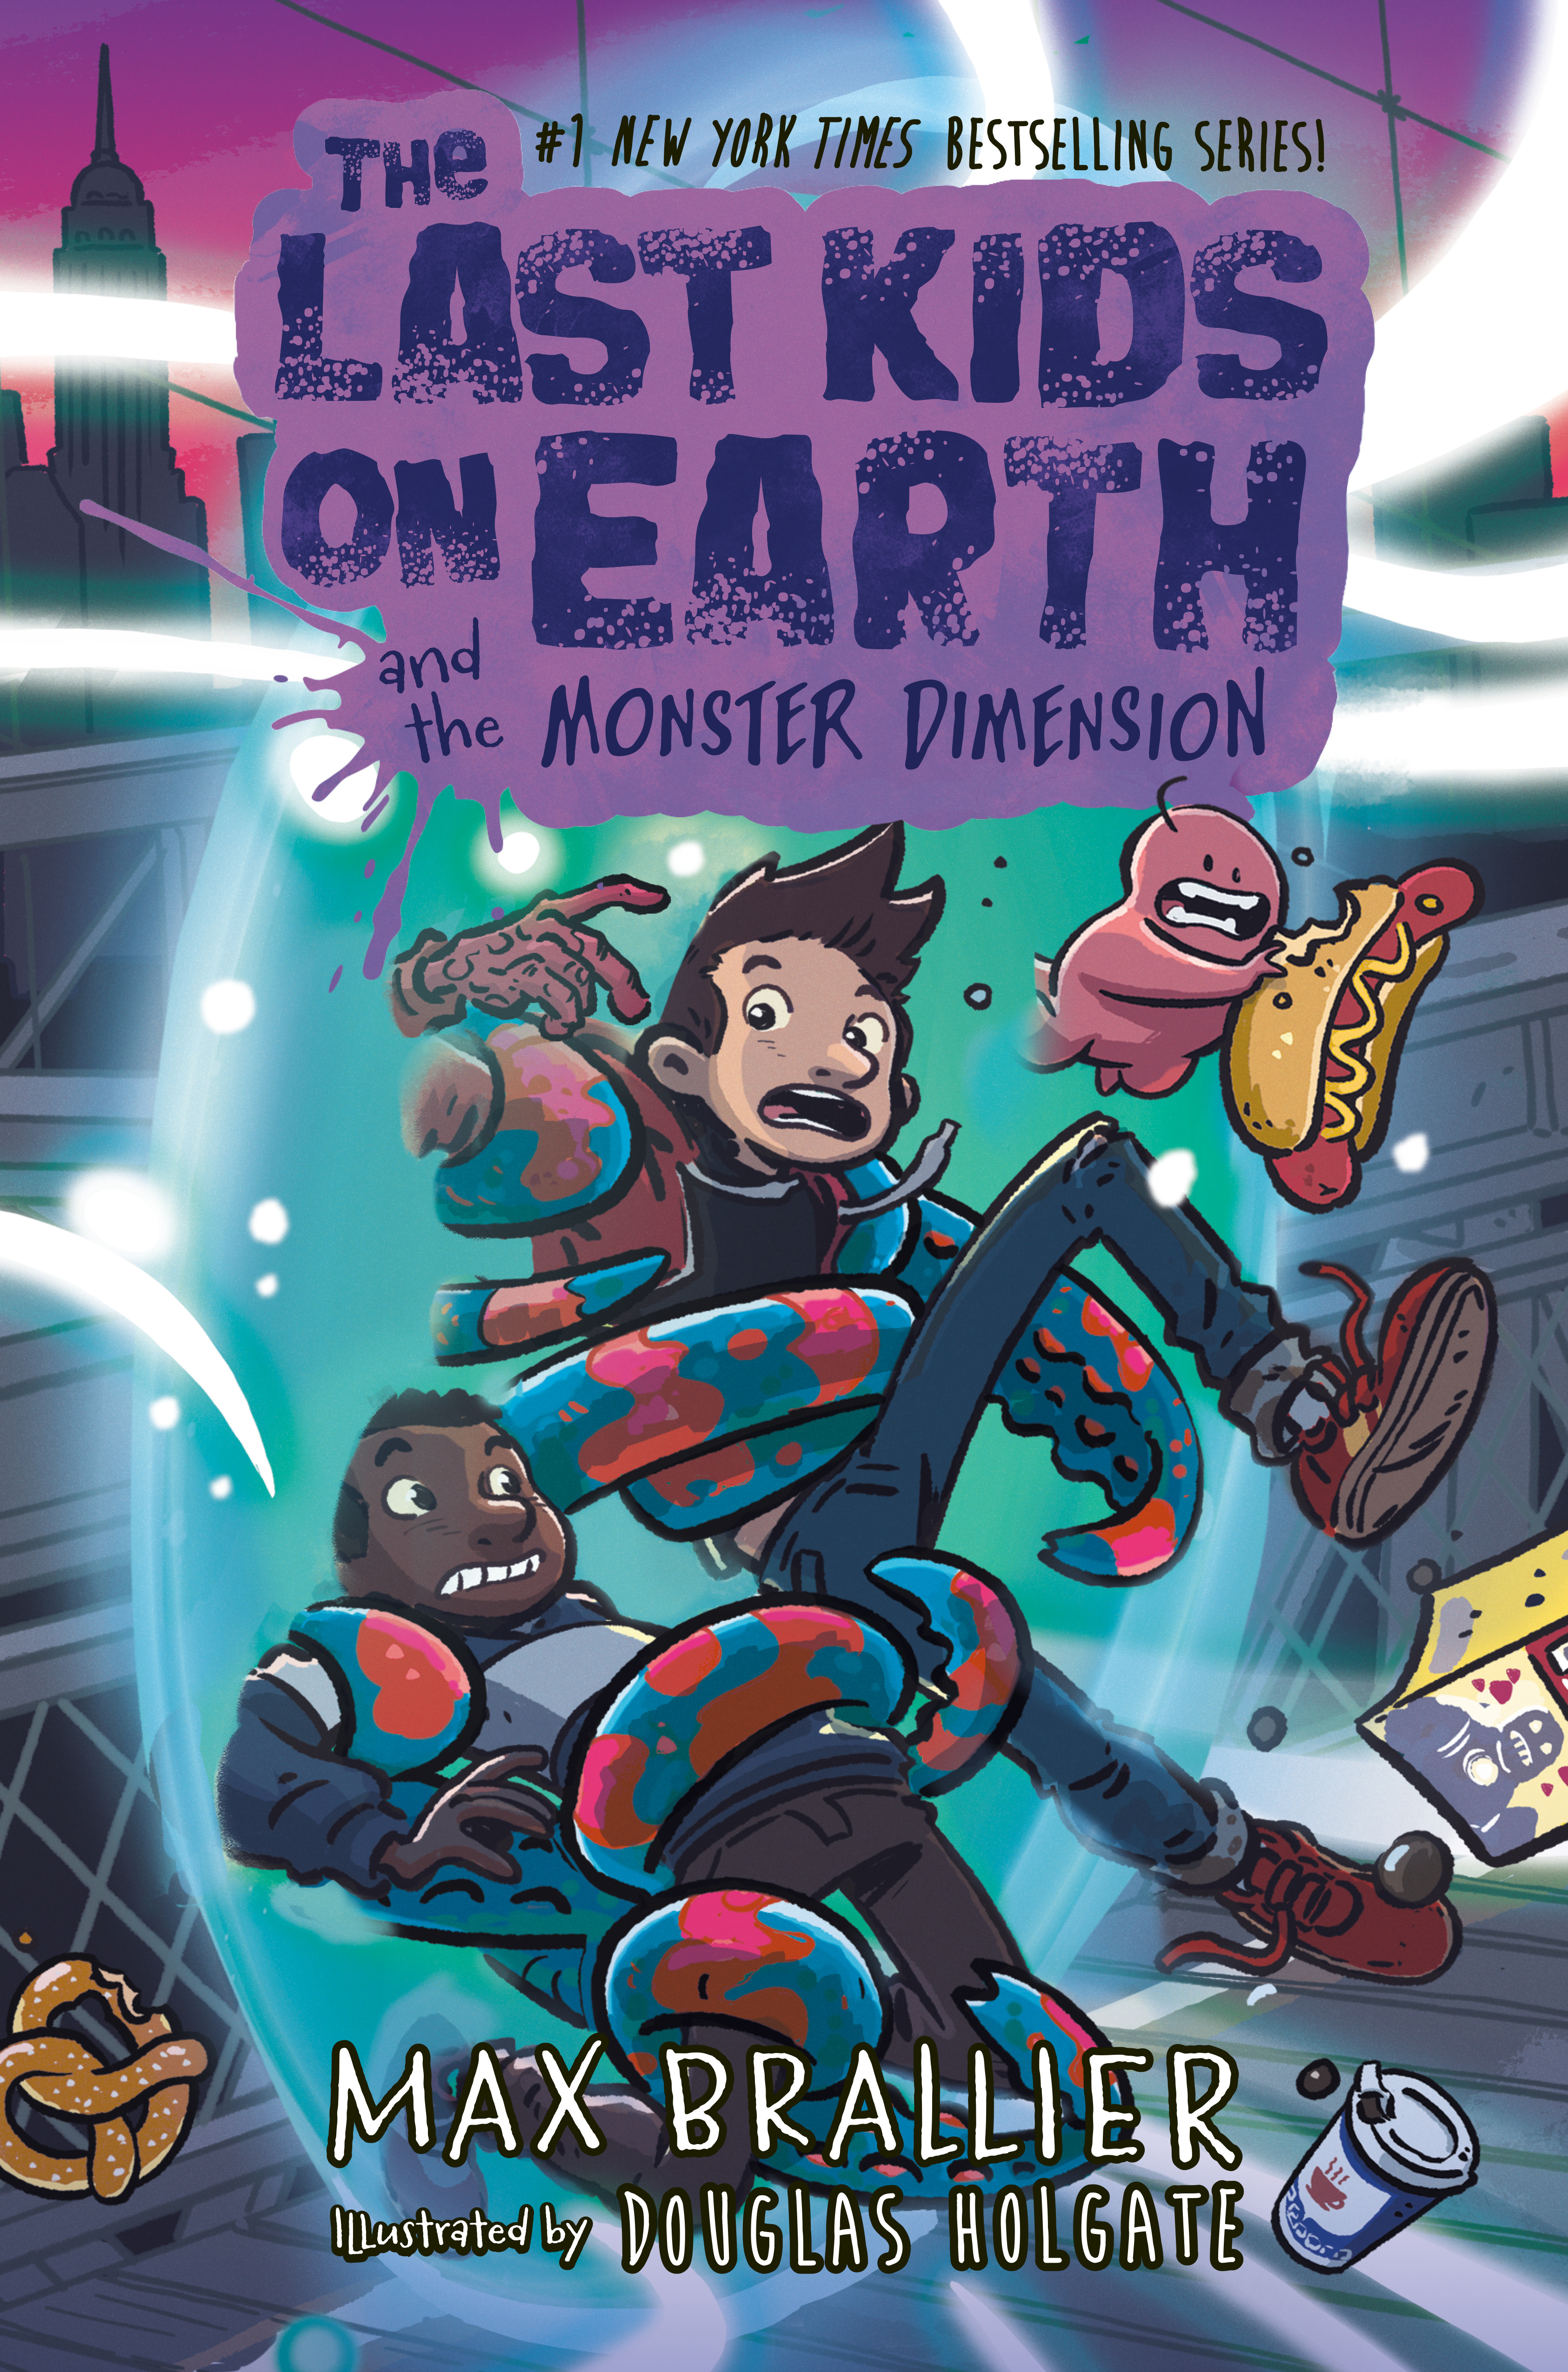 The Last Kids on Earth Vol.9 - The Last Kids on Earth and the Monster Dimension | Brallier, Max (Auteur) | Holgate, Douglas (Illustrateur)